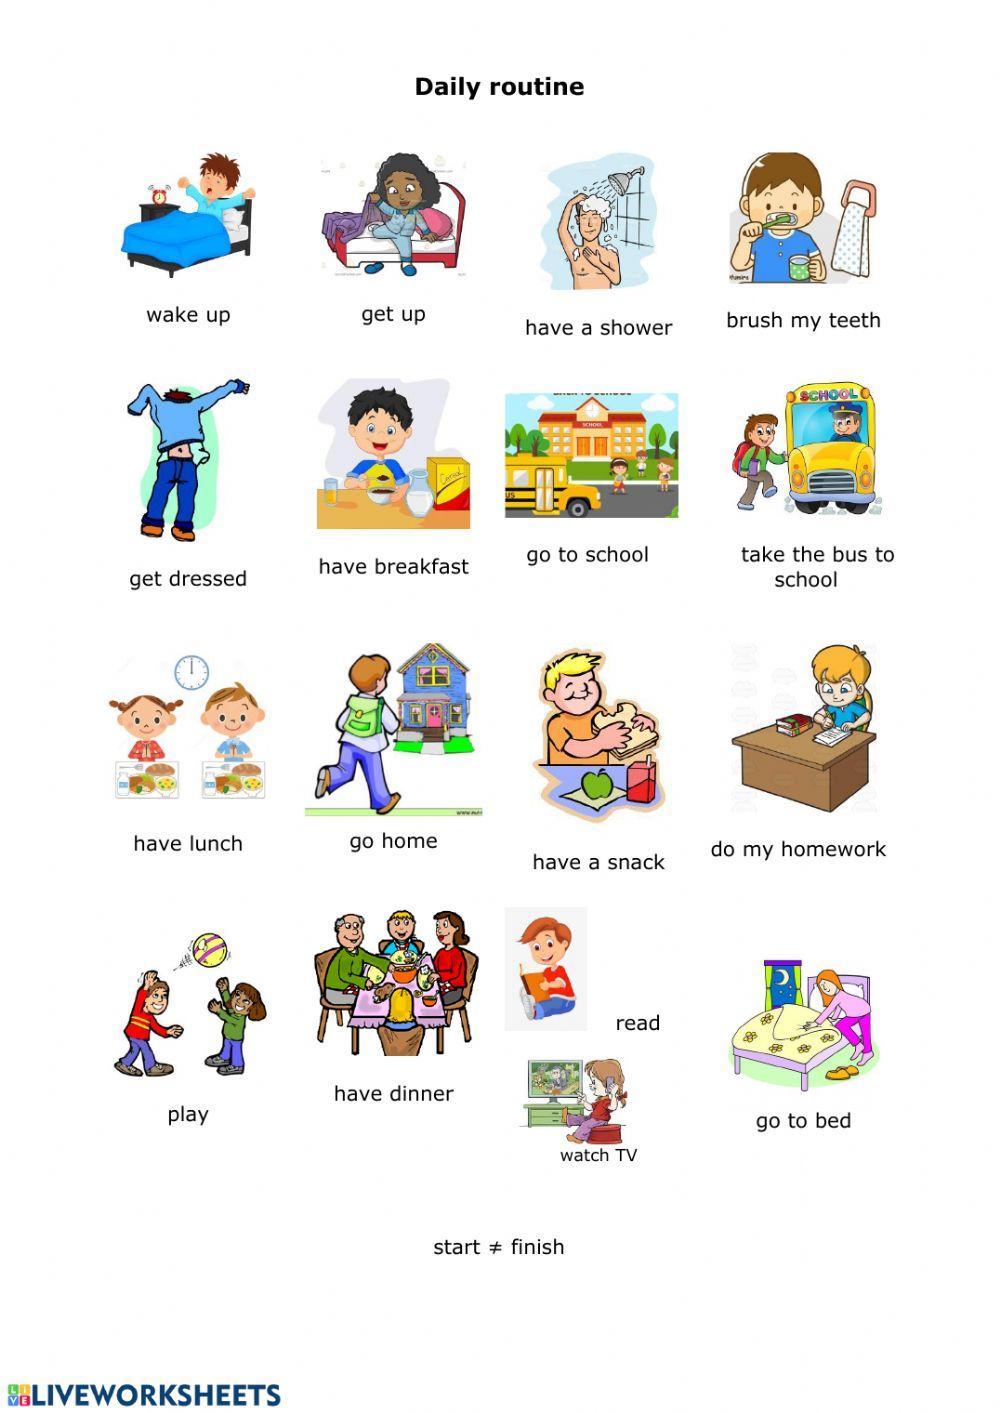 Daily routine vocabulary sheet